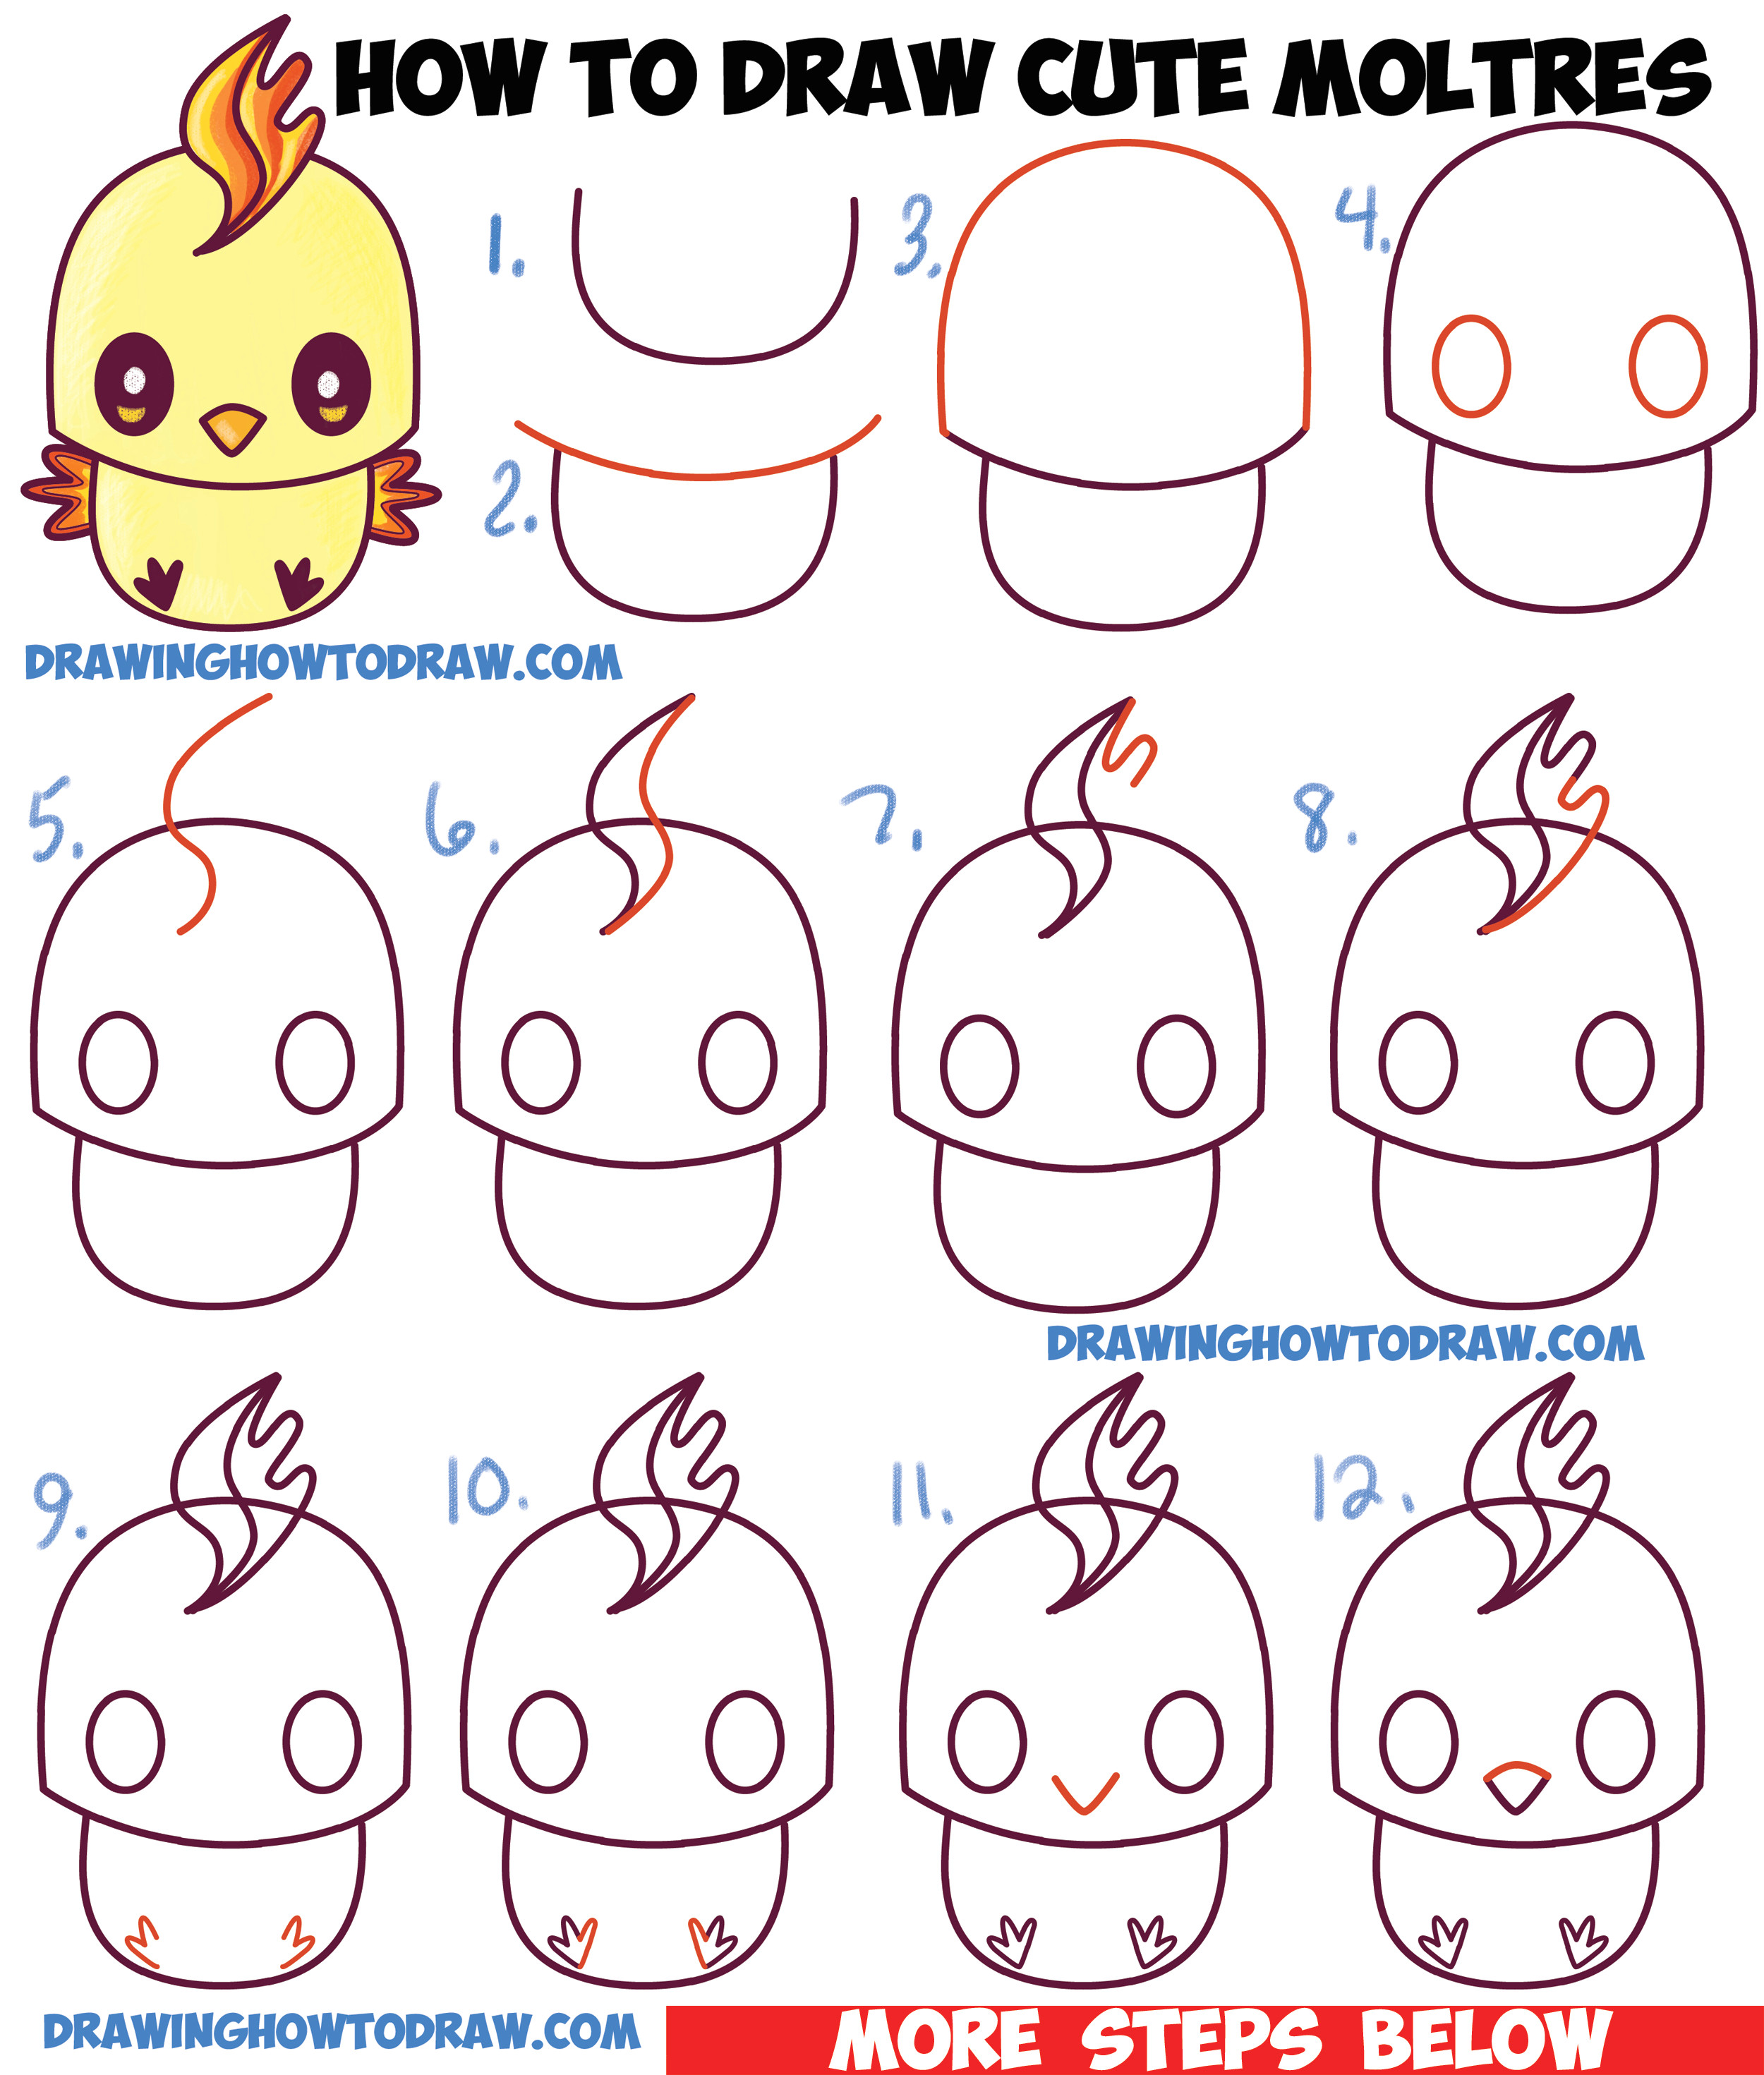 Drawing Cute Hello Kitty How to Draw Cute Kawaii Chibi Moltres From Pokemon In Easy Step